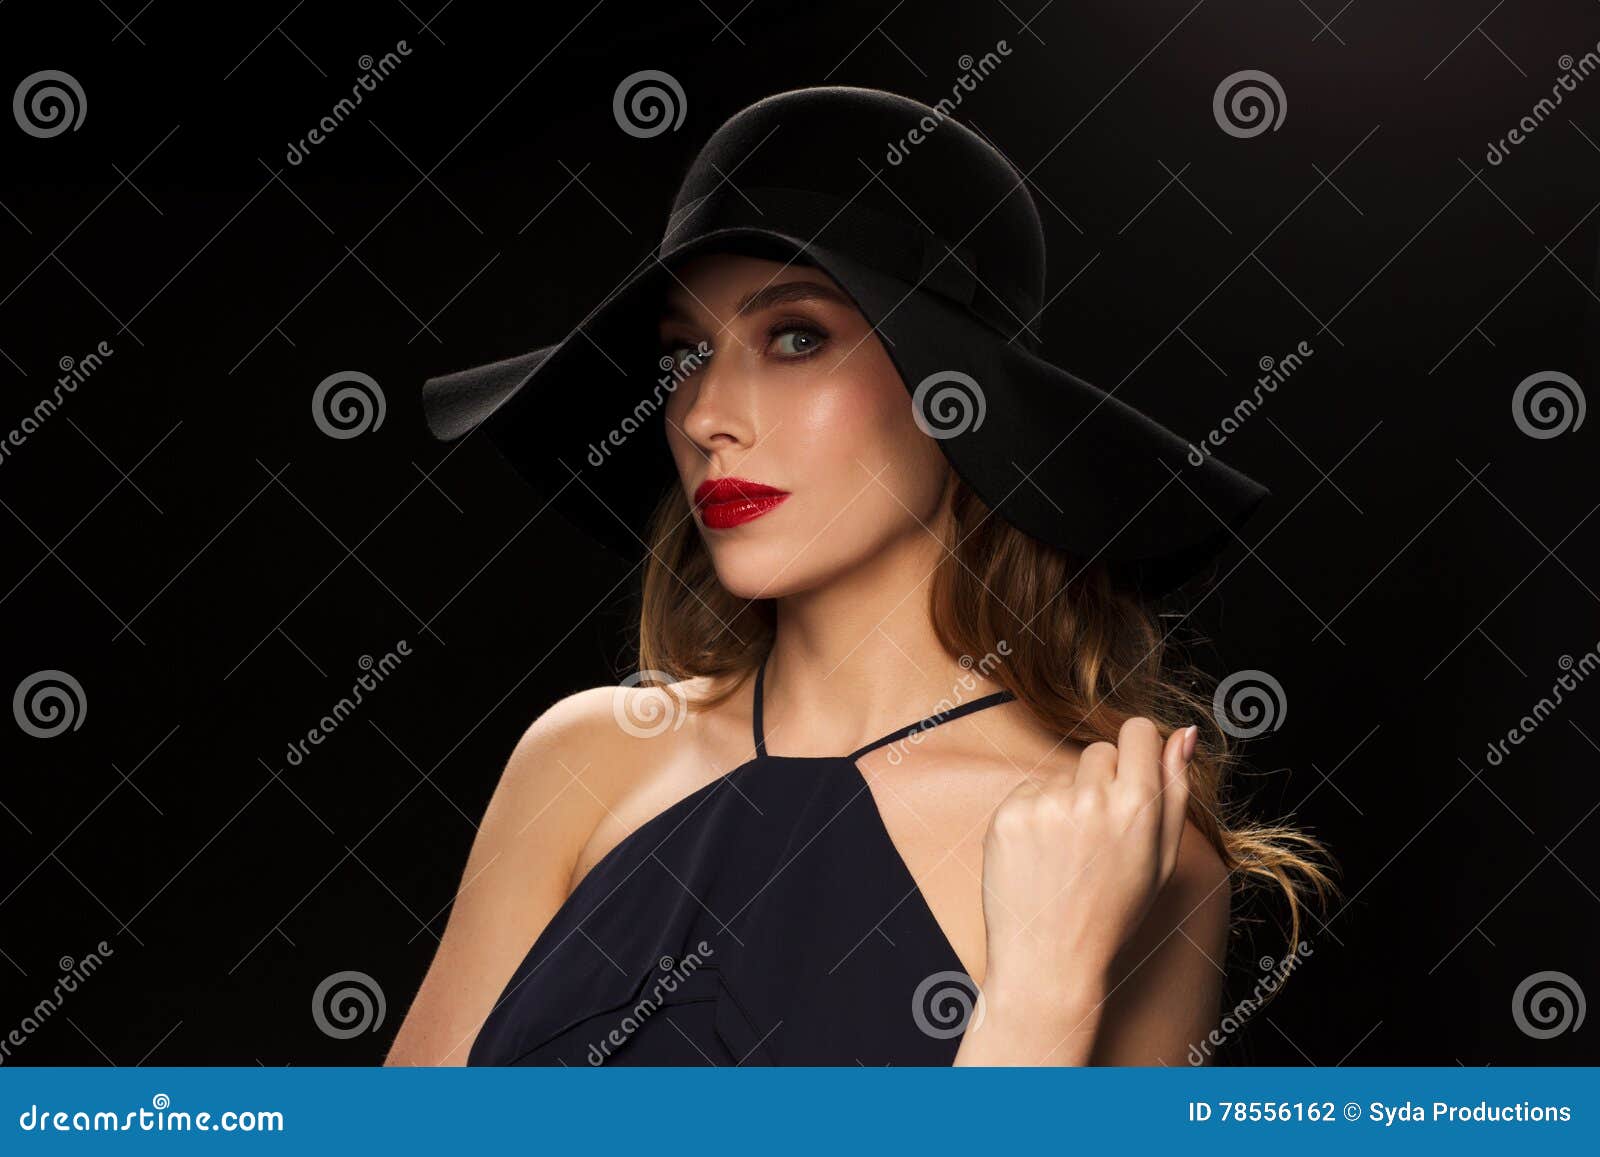 Beautiful Woman in Black Hat Over Dark Background Stock Photo - Image ...